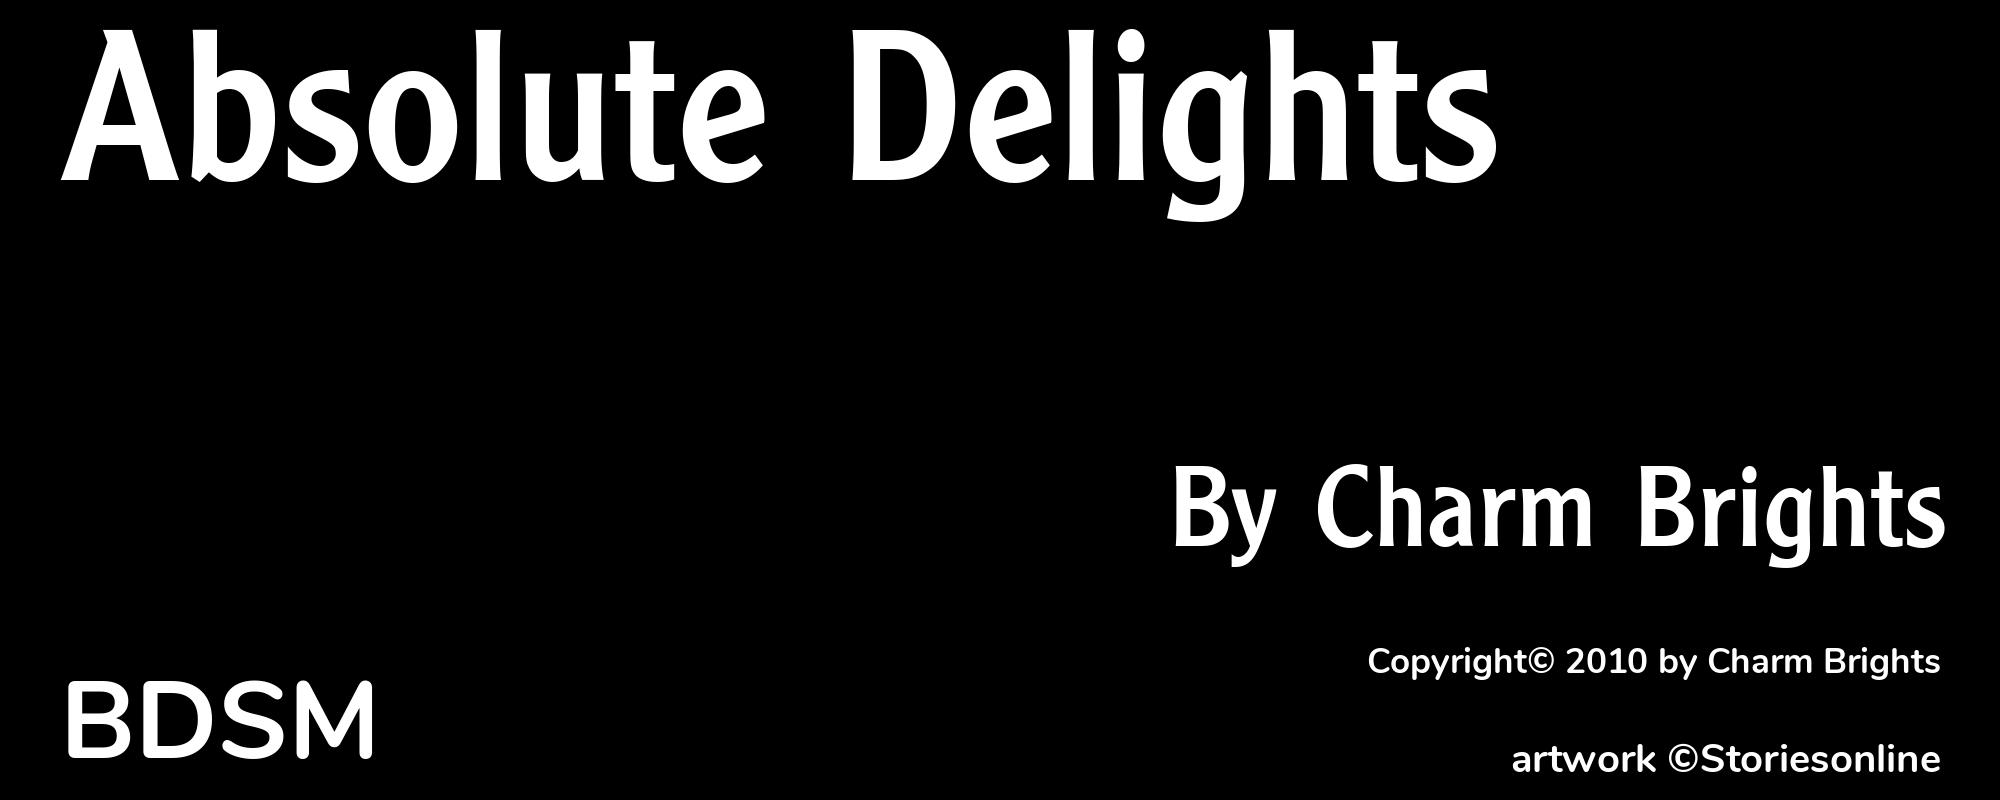 Absolute Delights - Cover